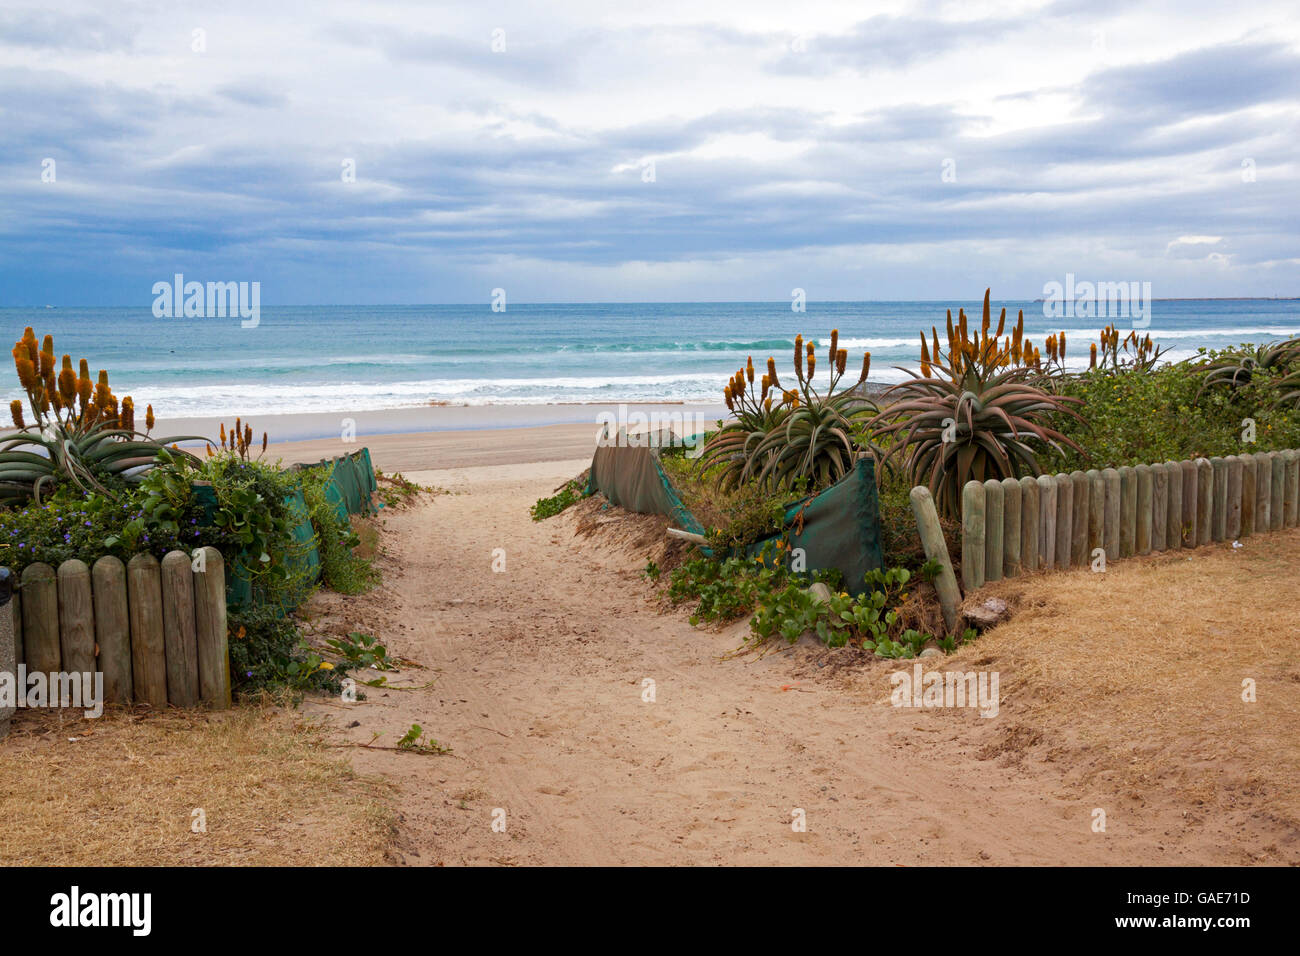 Sandy vehicle entrance onto beach lined with flowering aloes against overcast sky and skyline Stock Photo